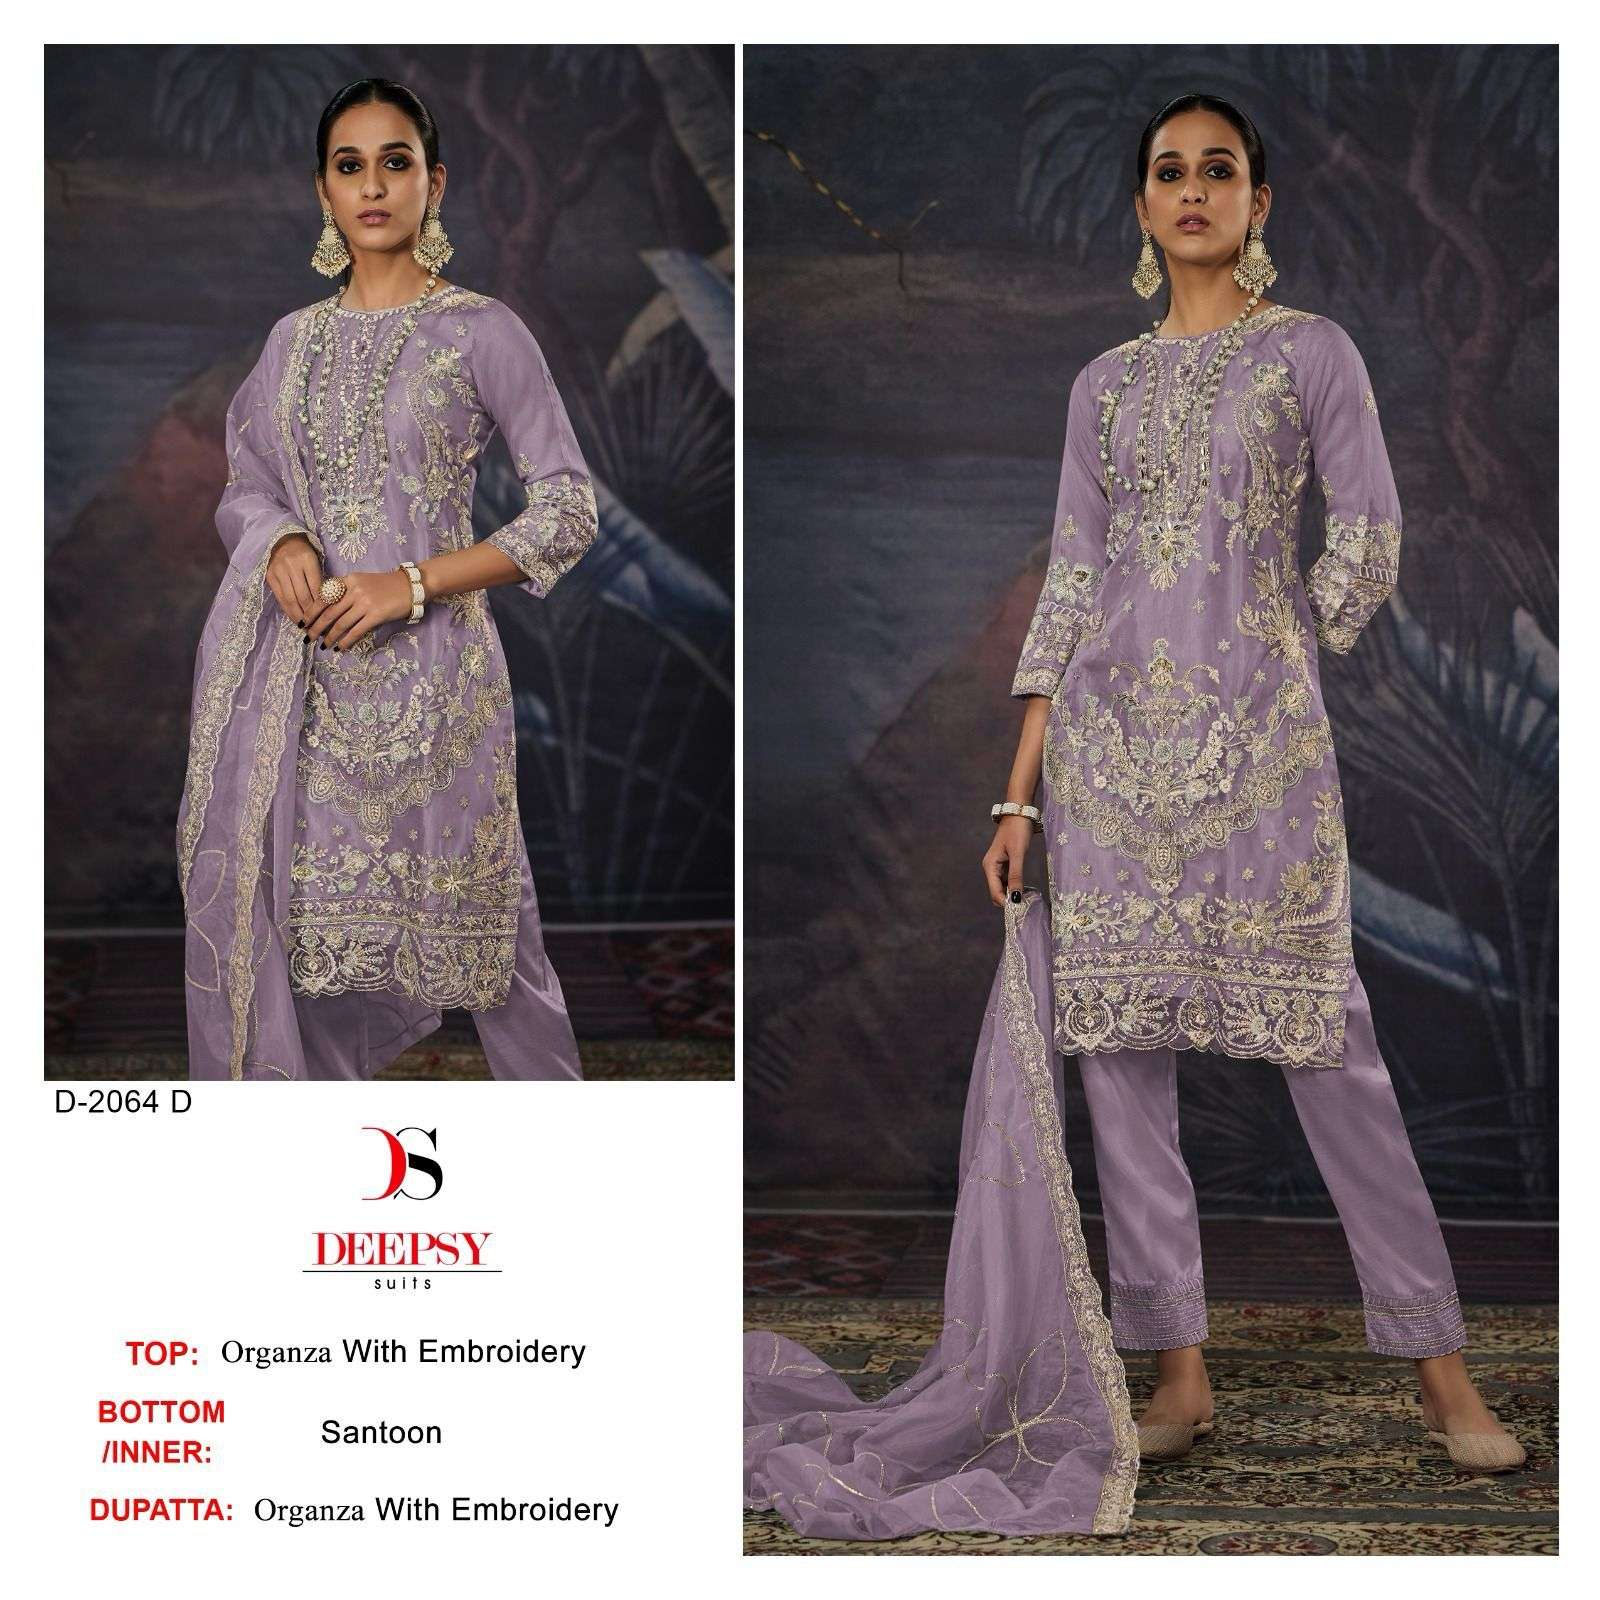 Deepsy suits 2064 Organza With Embroidery work Pakistani sal...